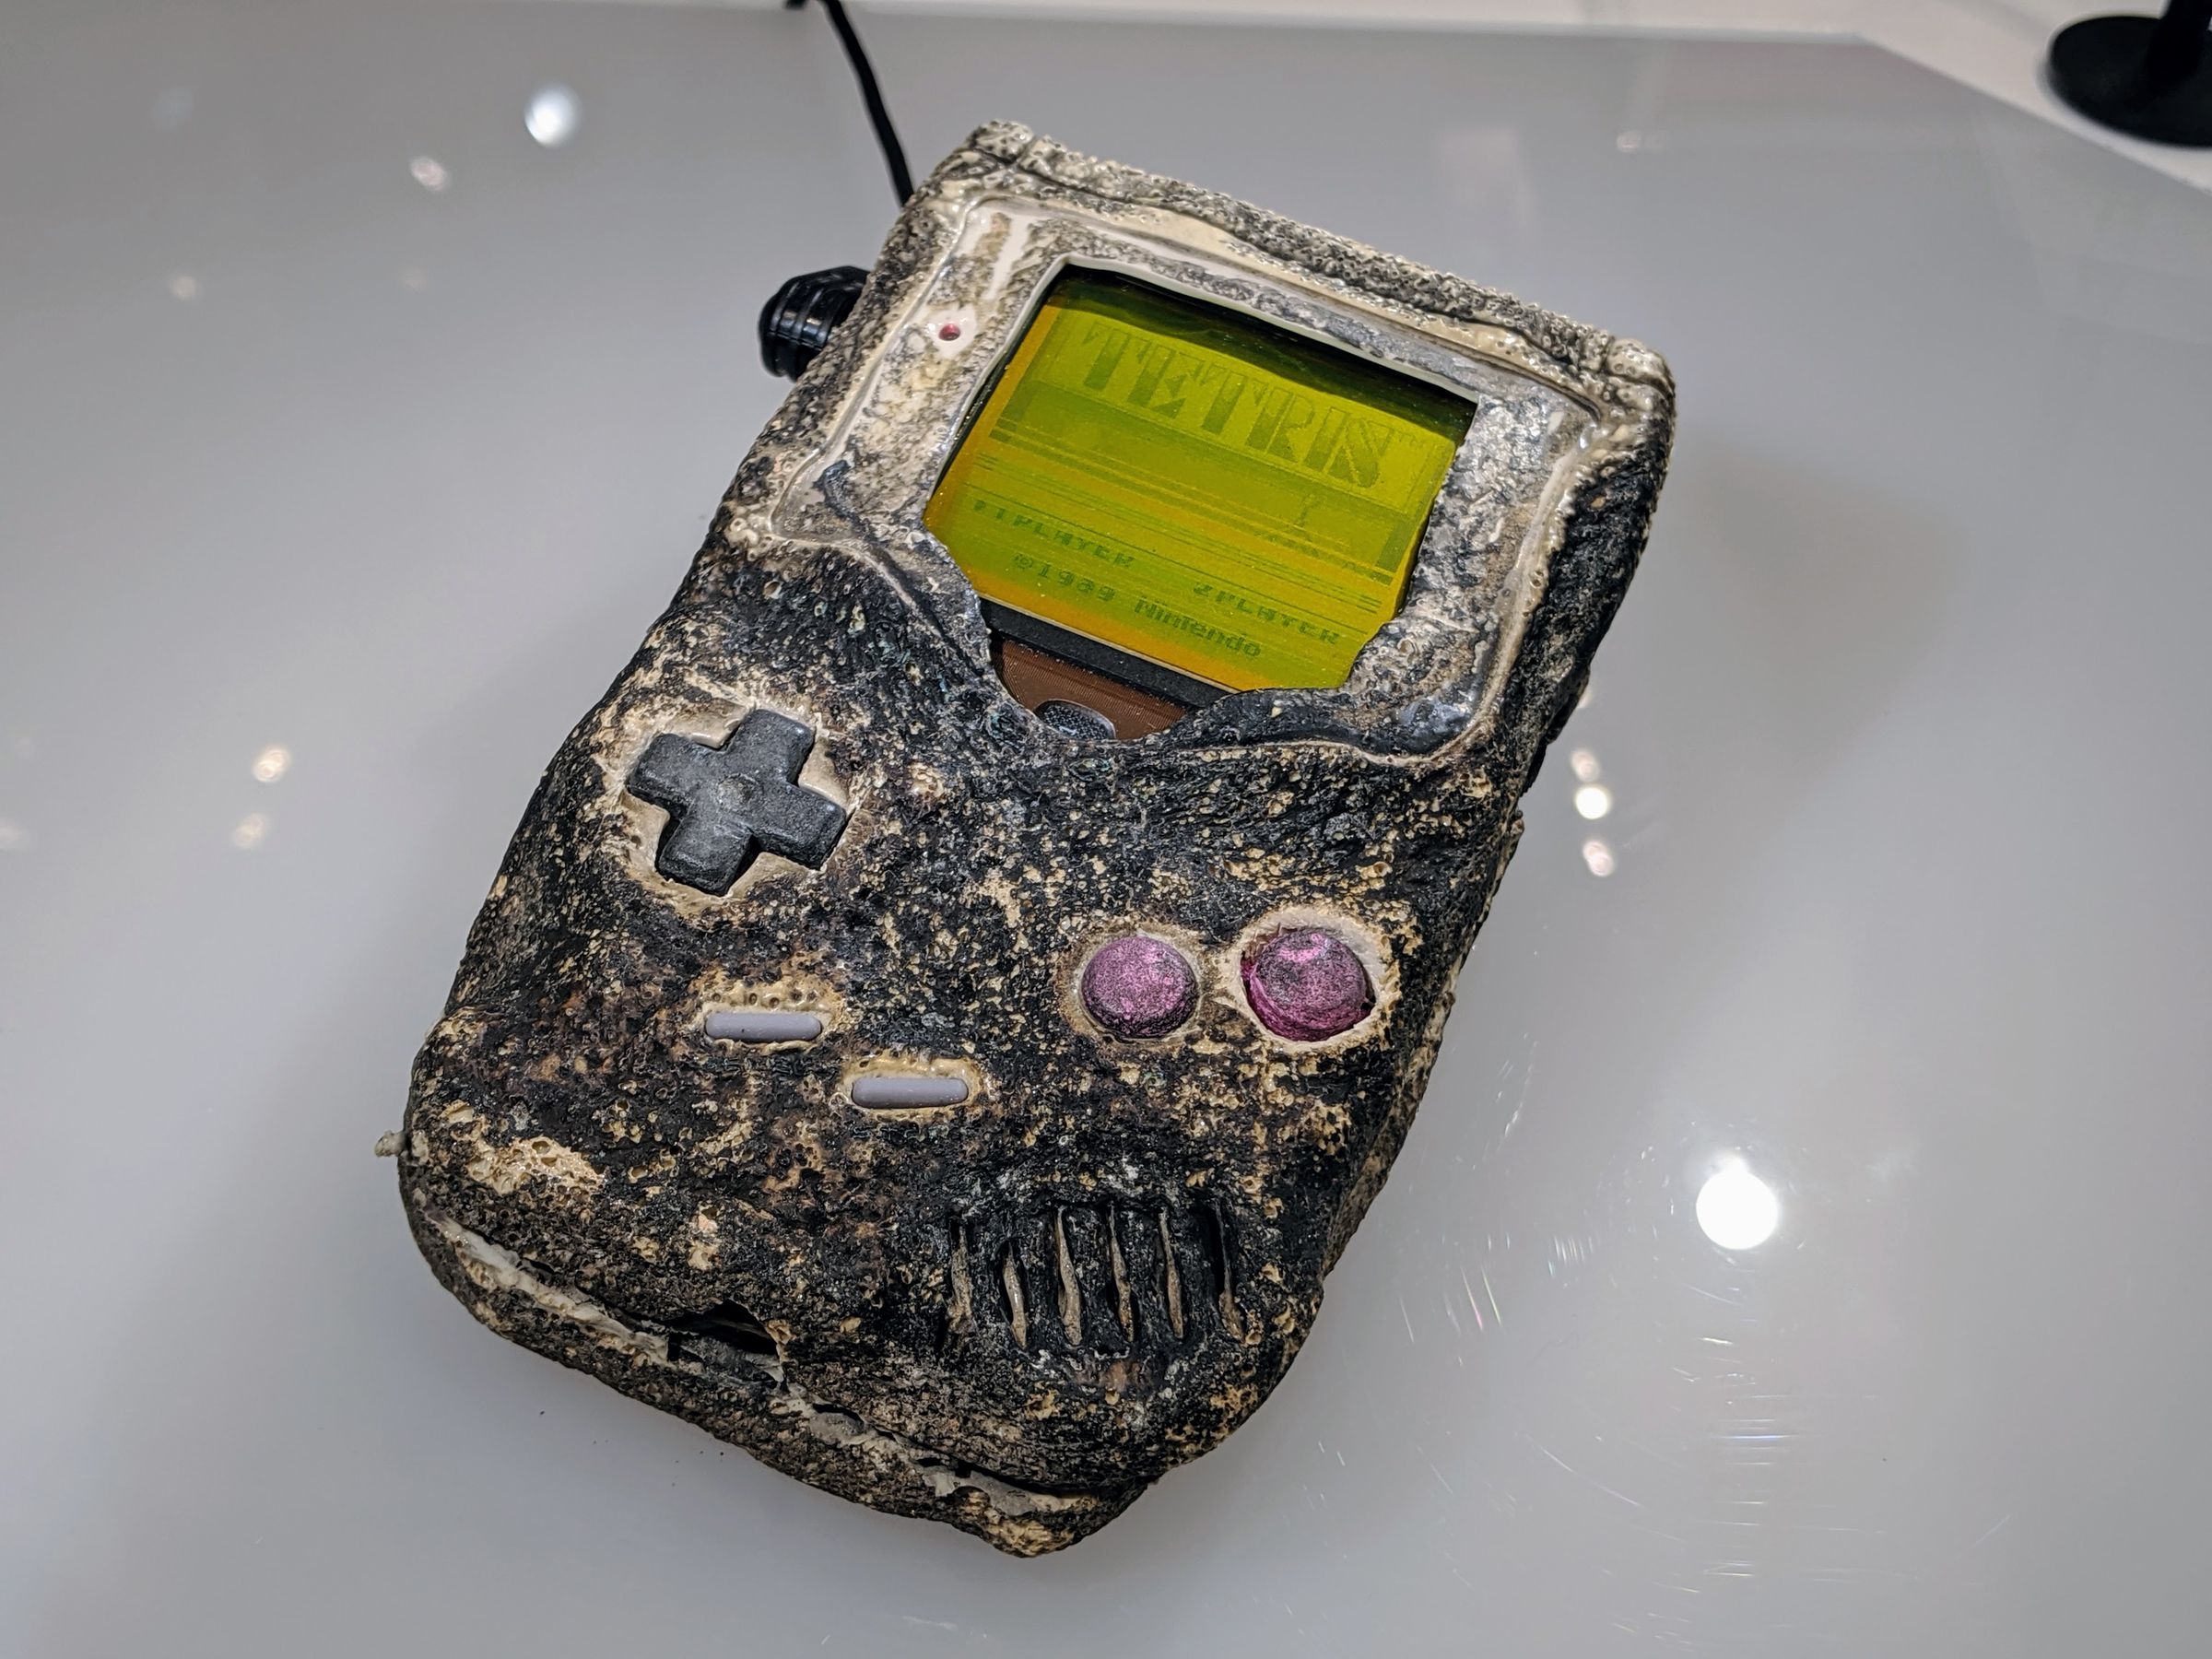 The top of the game boy is quite black with charring but Tetris is visible on the screen.